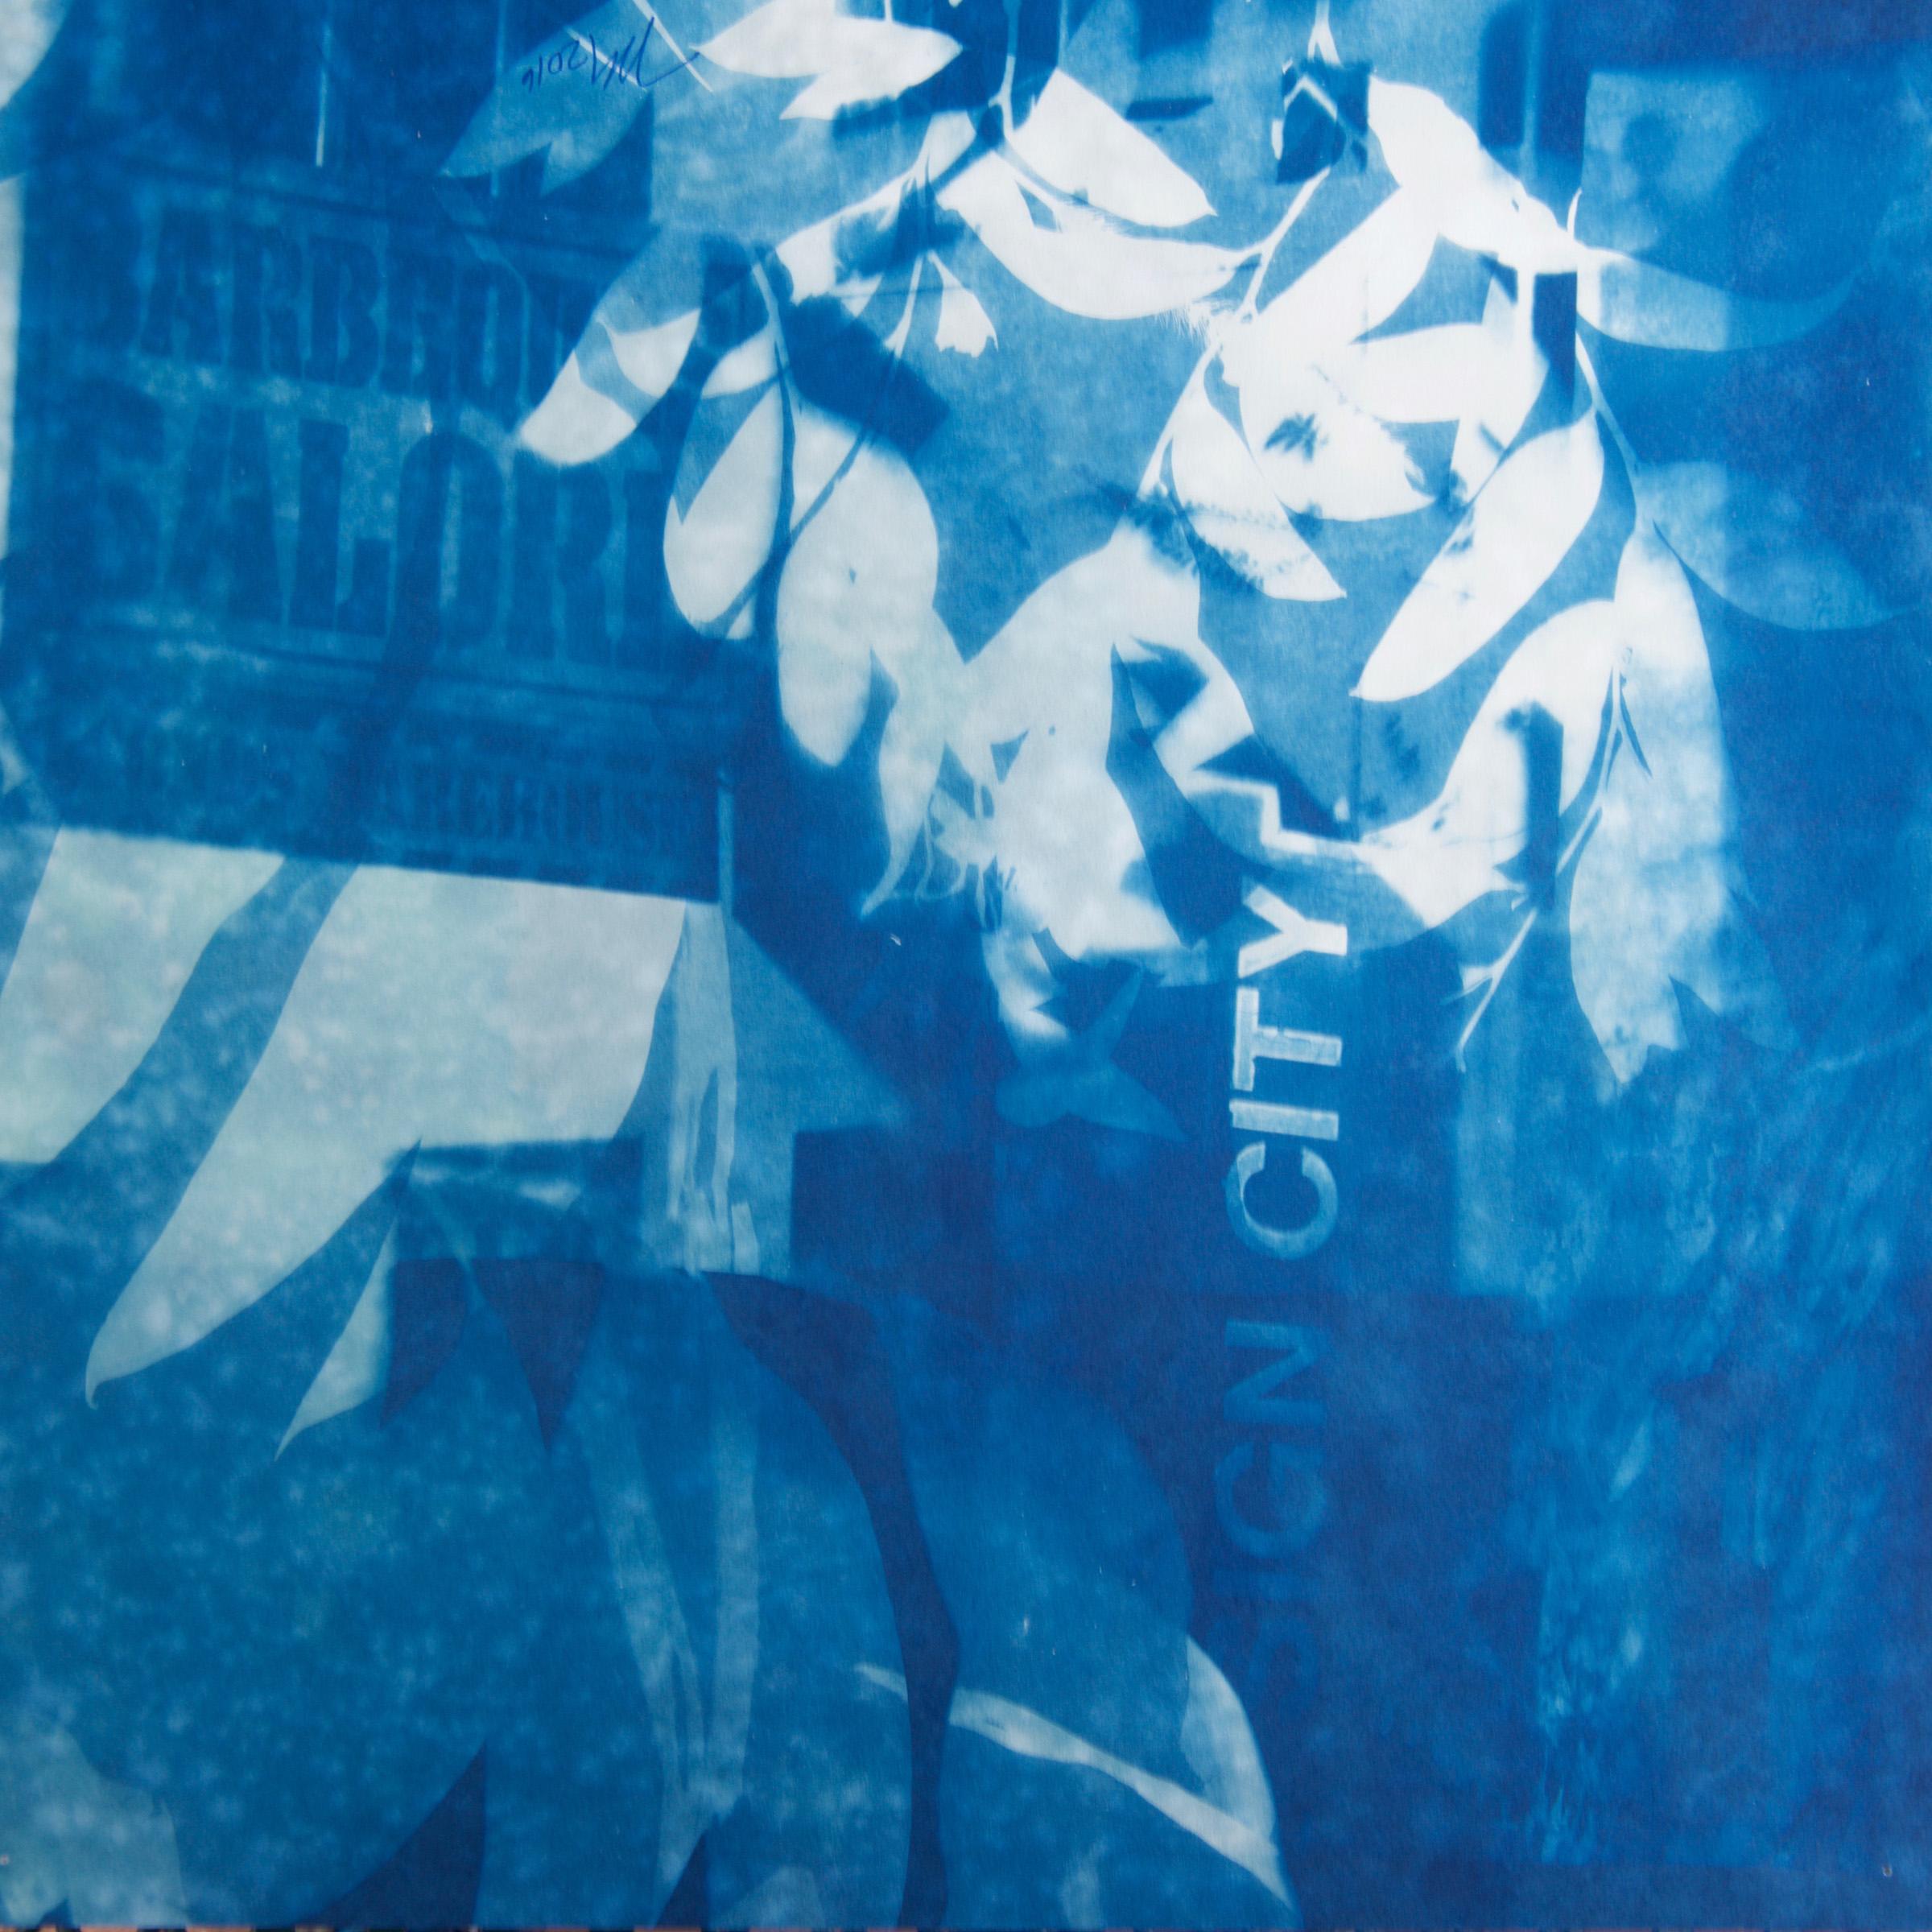 "Sign City Galore", contemporary, leaves, building, blue, cyanotype, photograph - Photograph by Marie Craig